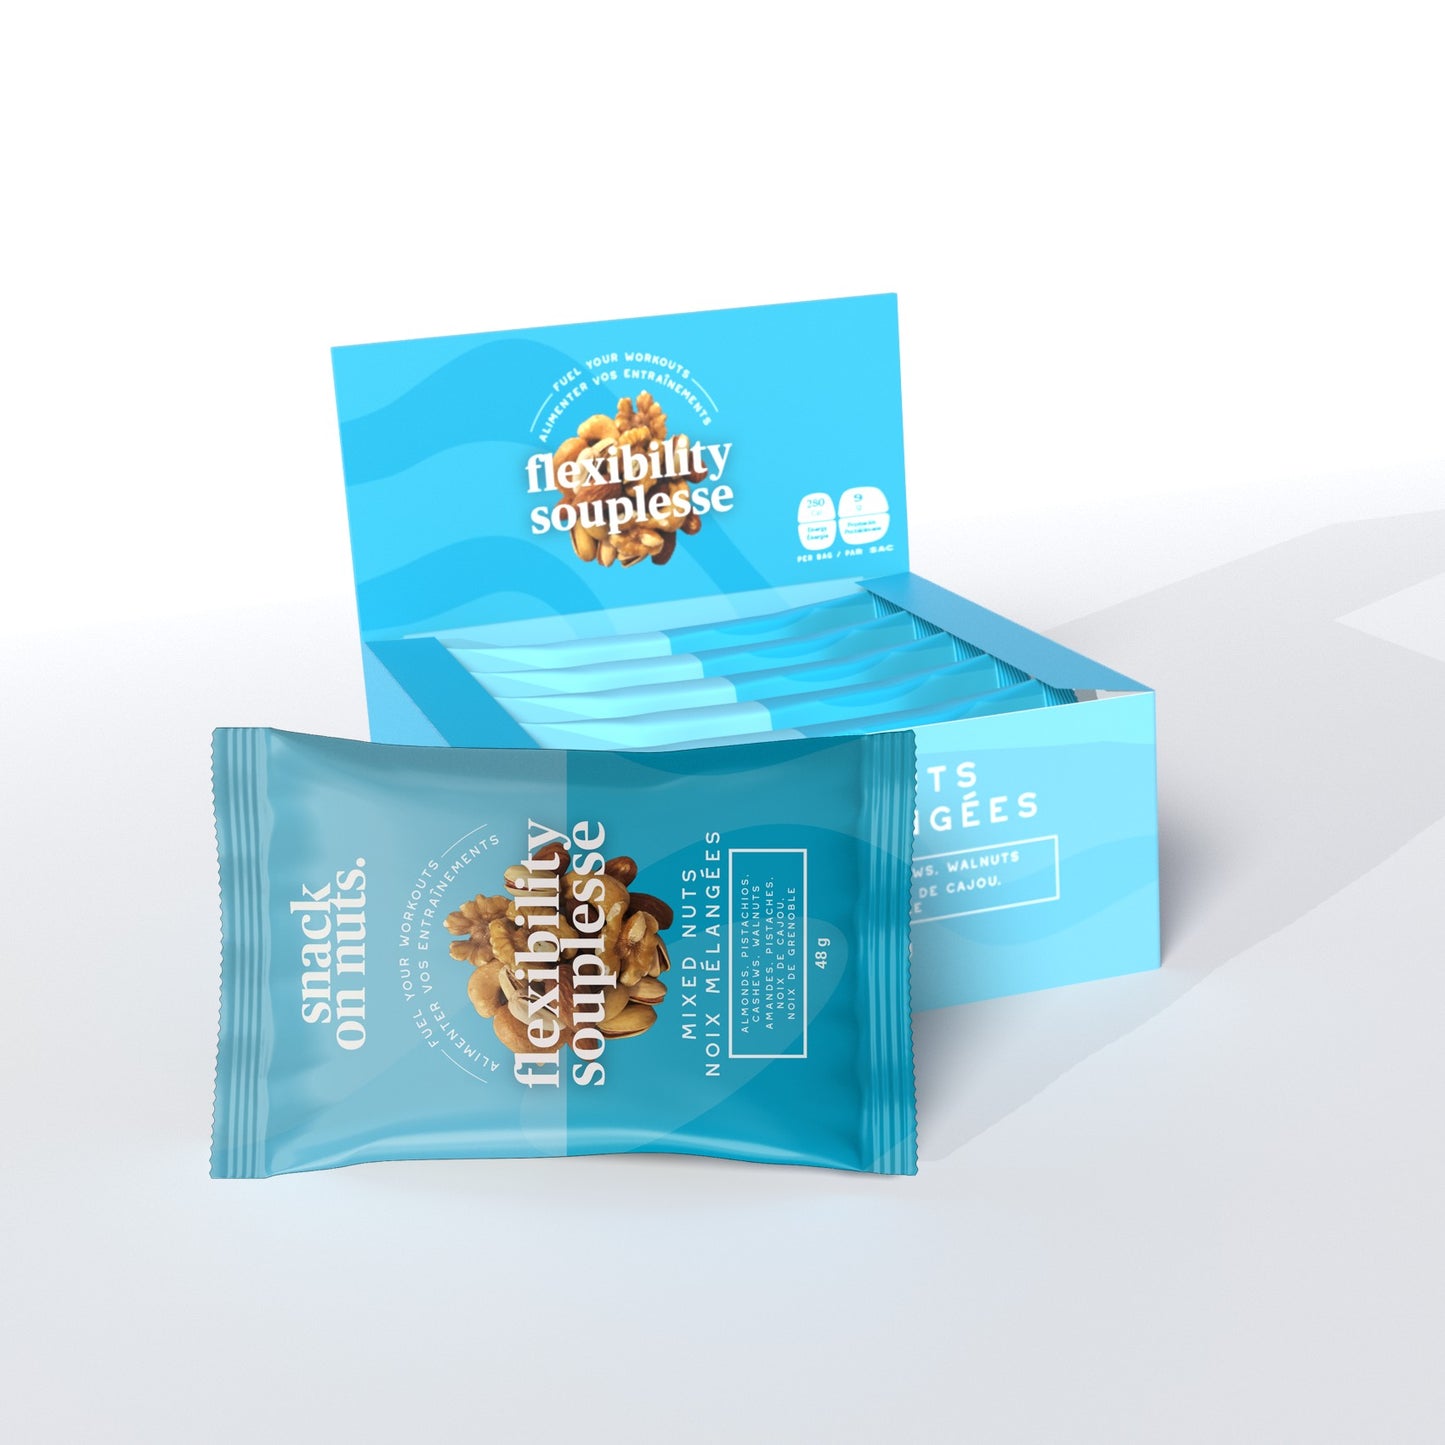 Flexibility Mixed Nuts - 240g Box (5 x 48g Individual Packs) - Roasted Almonds, Cashews, Pistachios, and Raw Walnuts Snacks